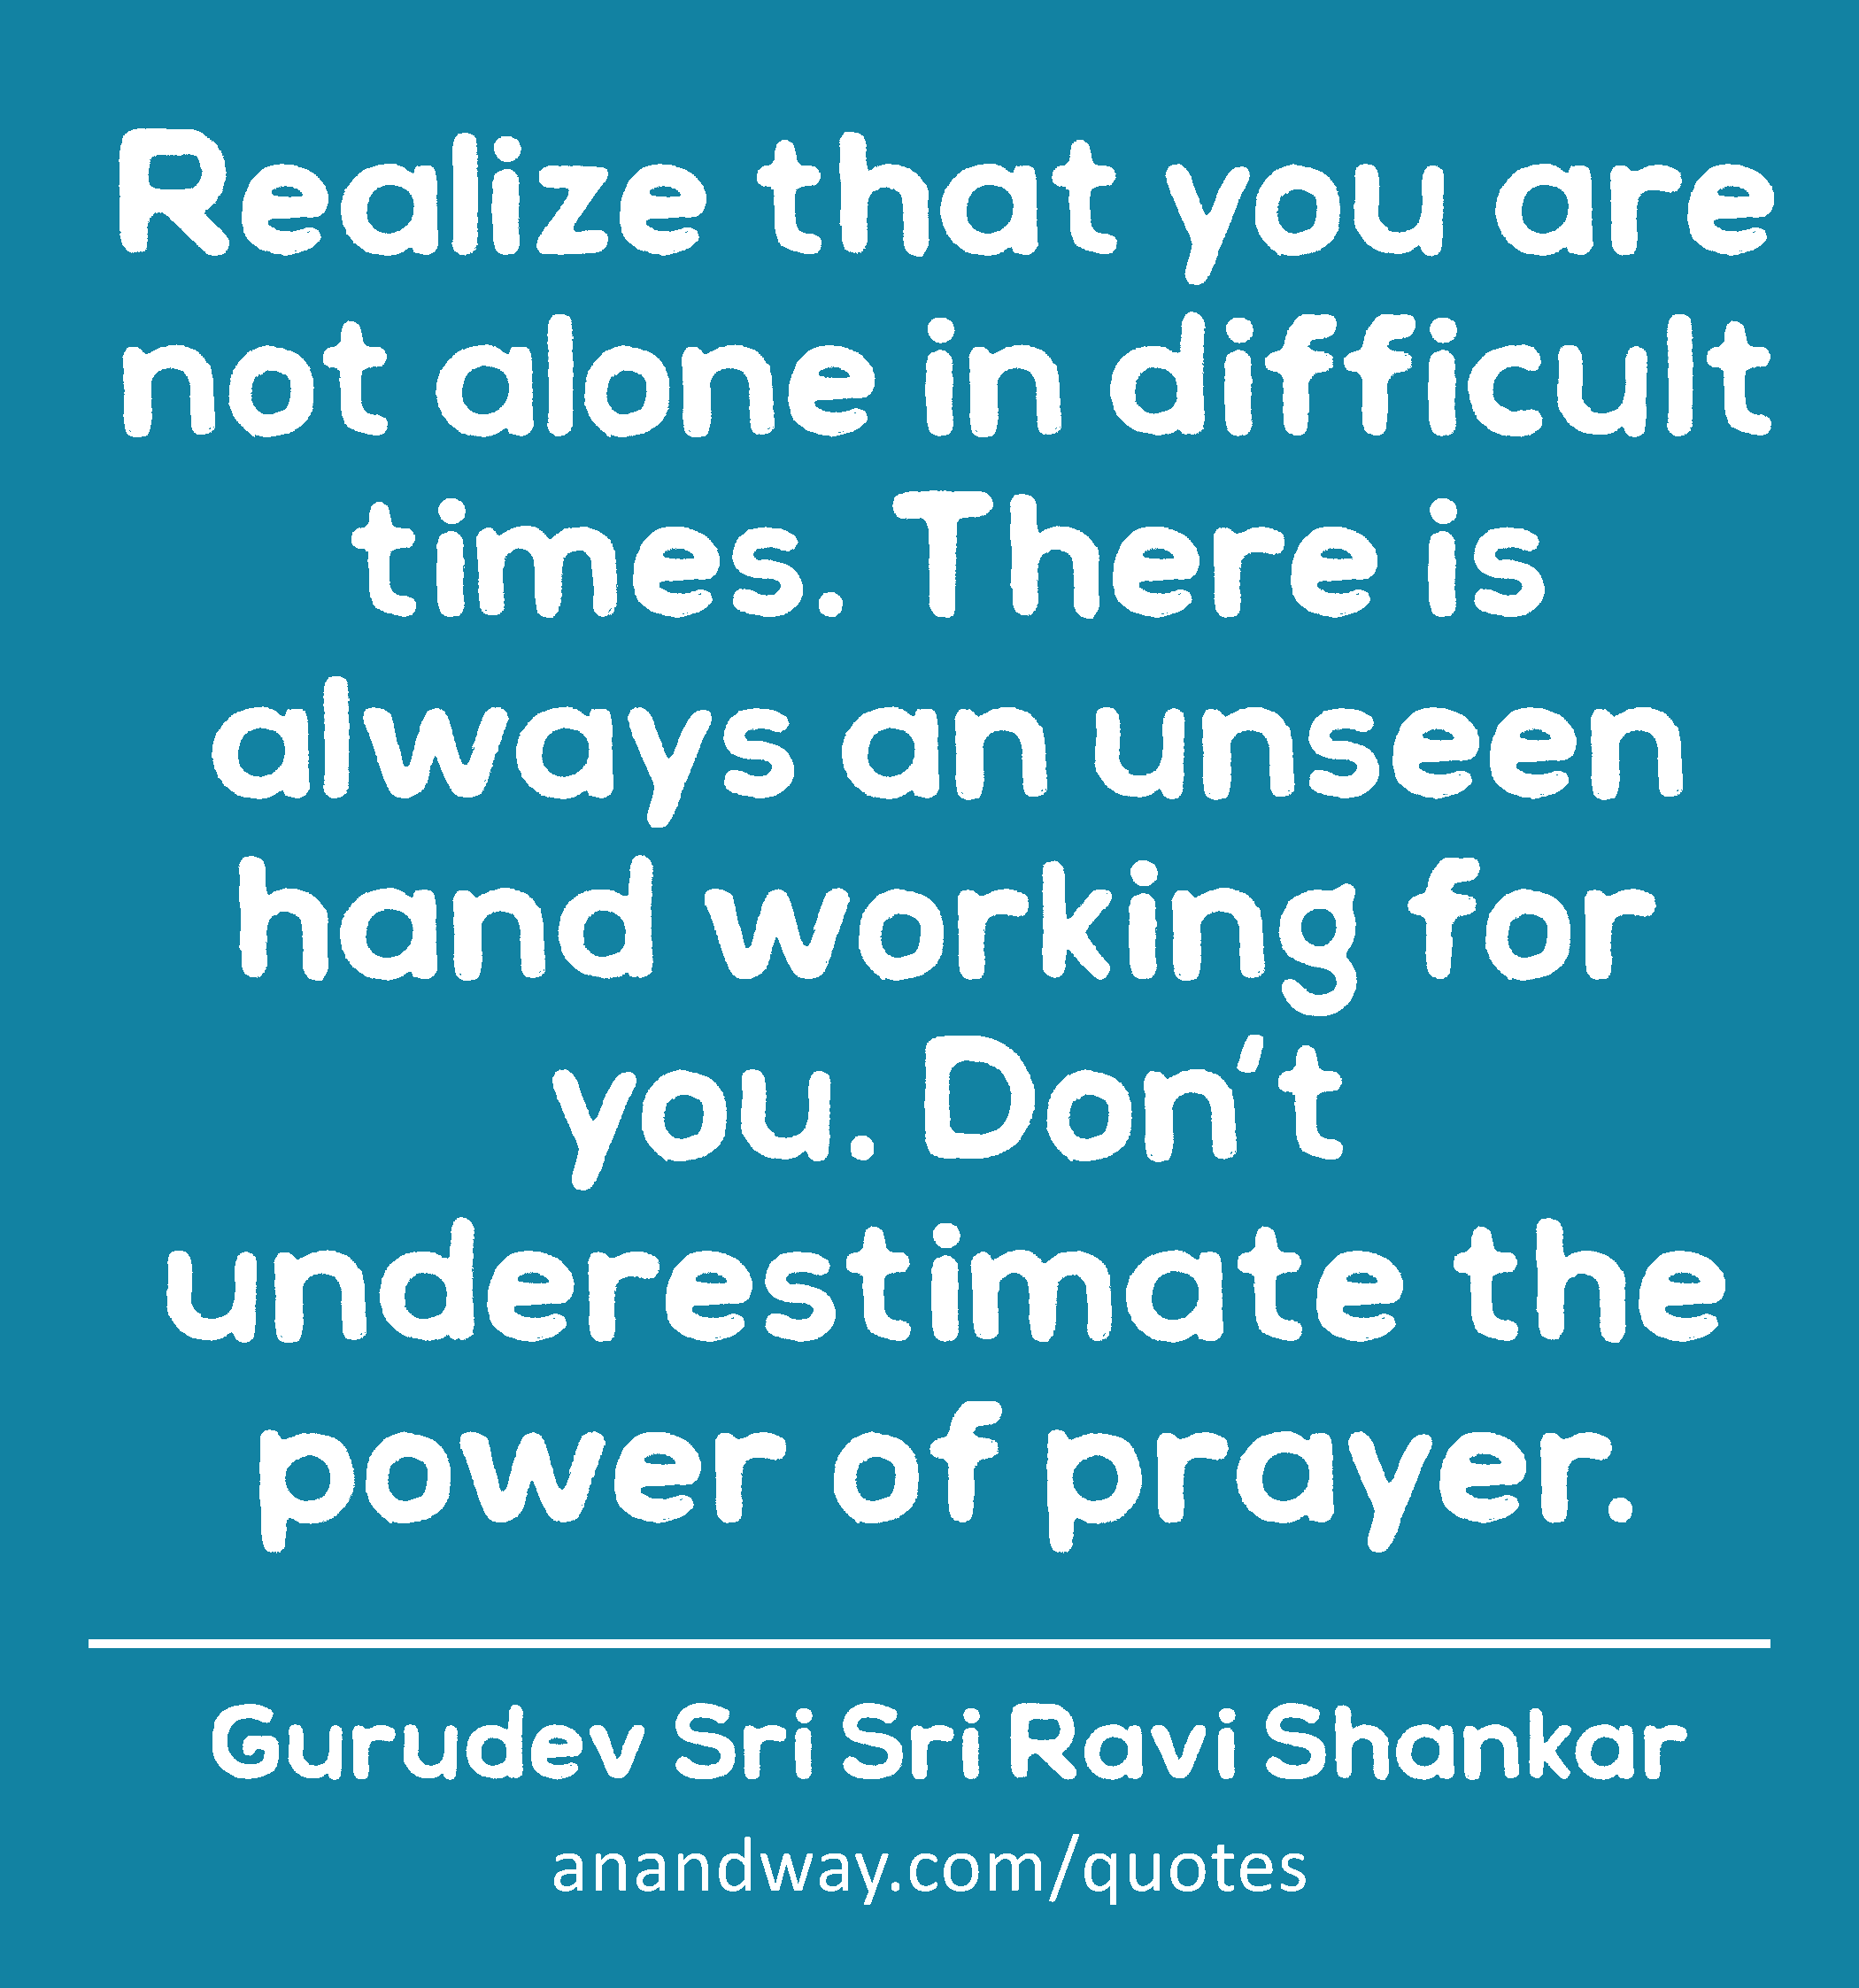 Realize that you are not alone in difficult times. There is always an unseen hand working for you.
 -Gurudev Sri Sri Ravi Shankar